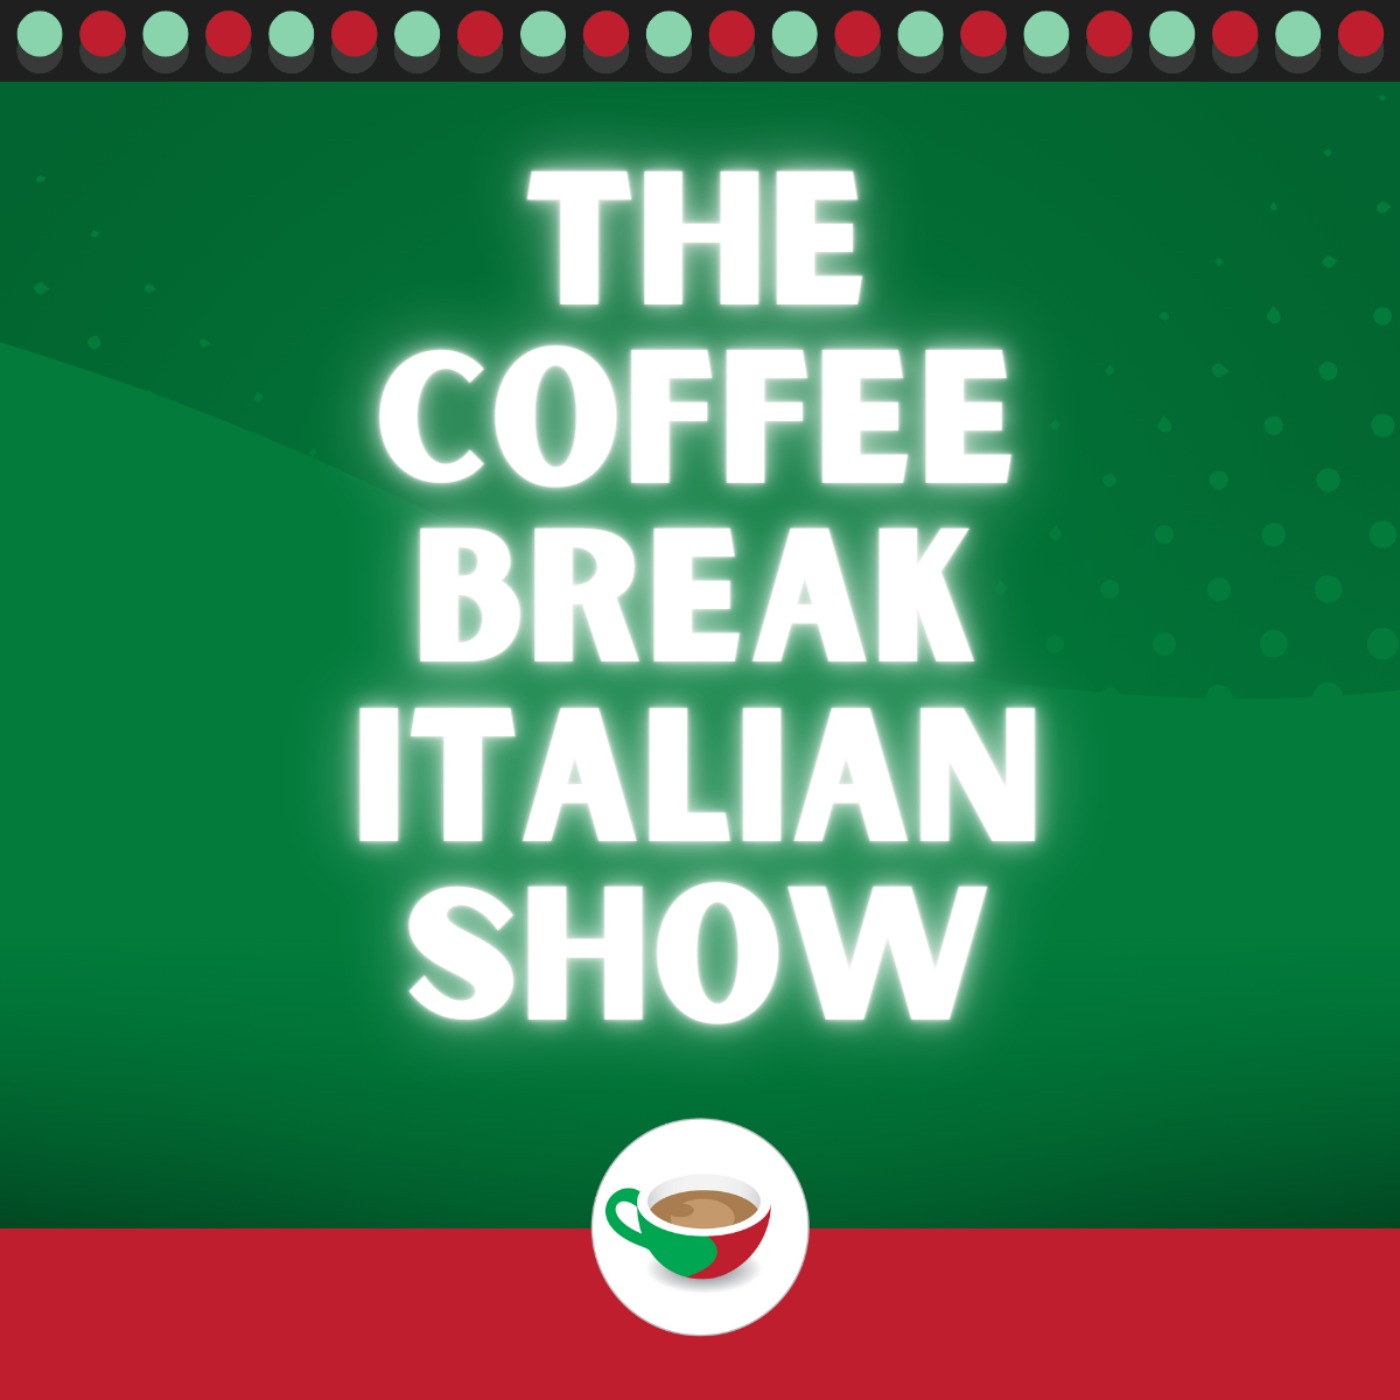 ‘Potere’, ‘sapere’, ‘riuscire’ - How to translate ‘can’ | The Coffee Break Italian Show 1.04